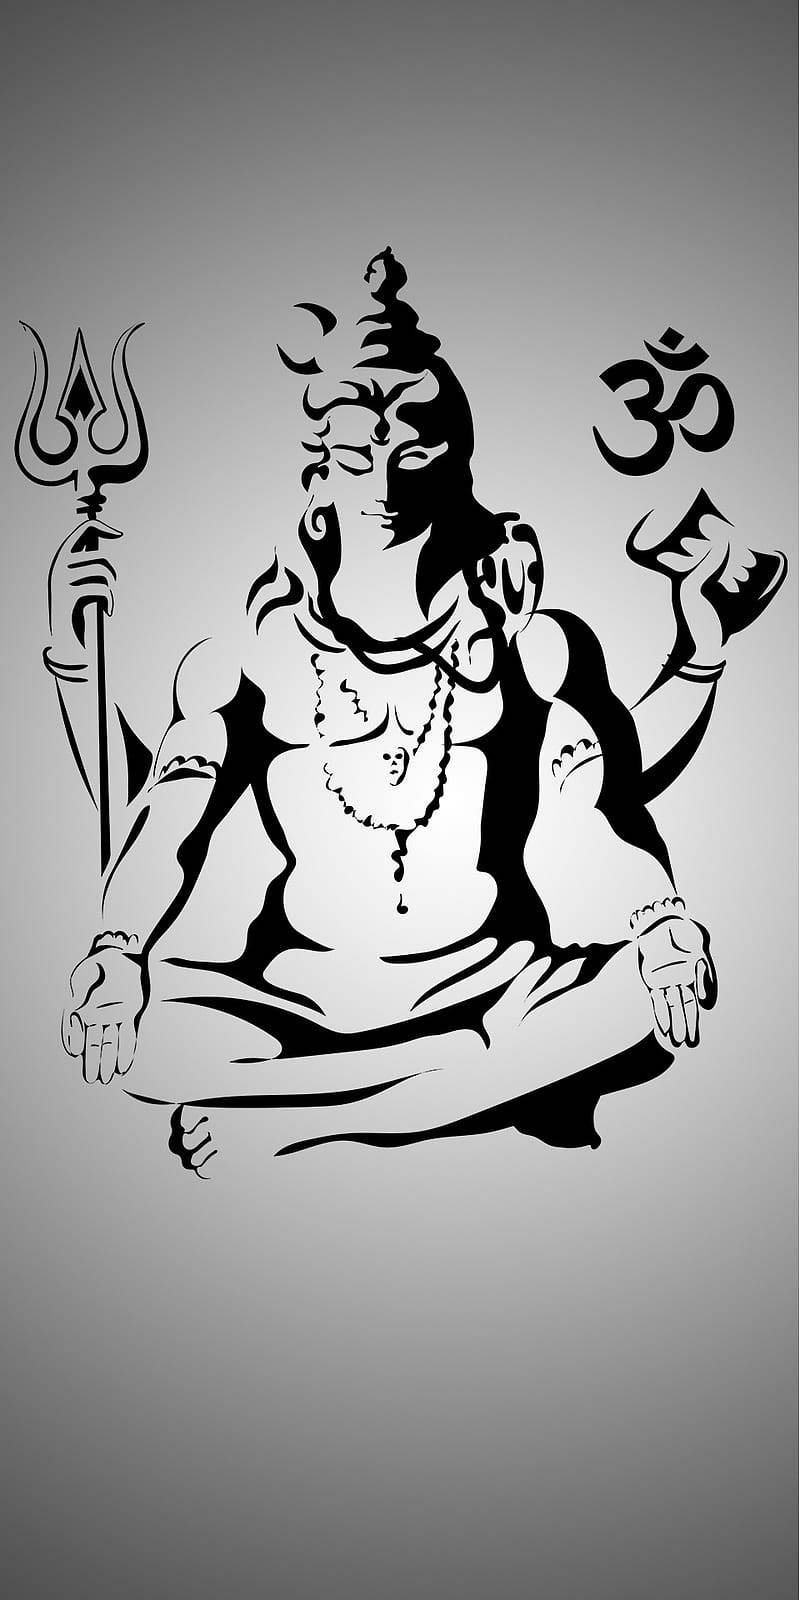 Lord Shiva Metal Wall Art For Home Decor Price in India - Buy Lord Shiva  Metal Wall Art For Home Decor online at Shopsy.in